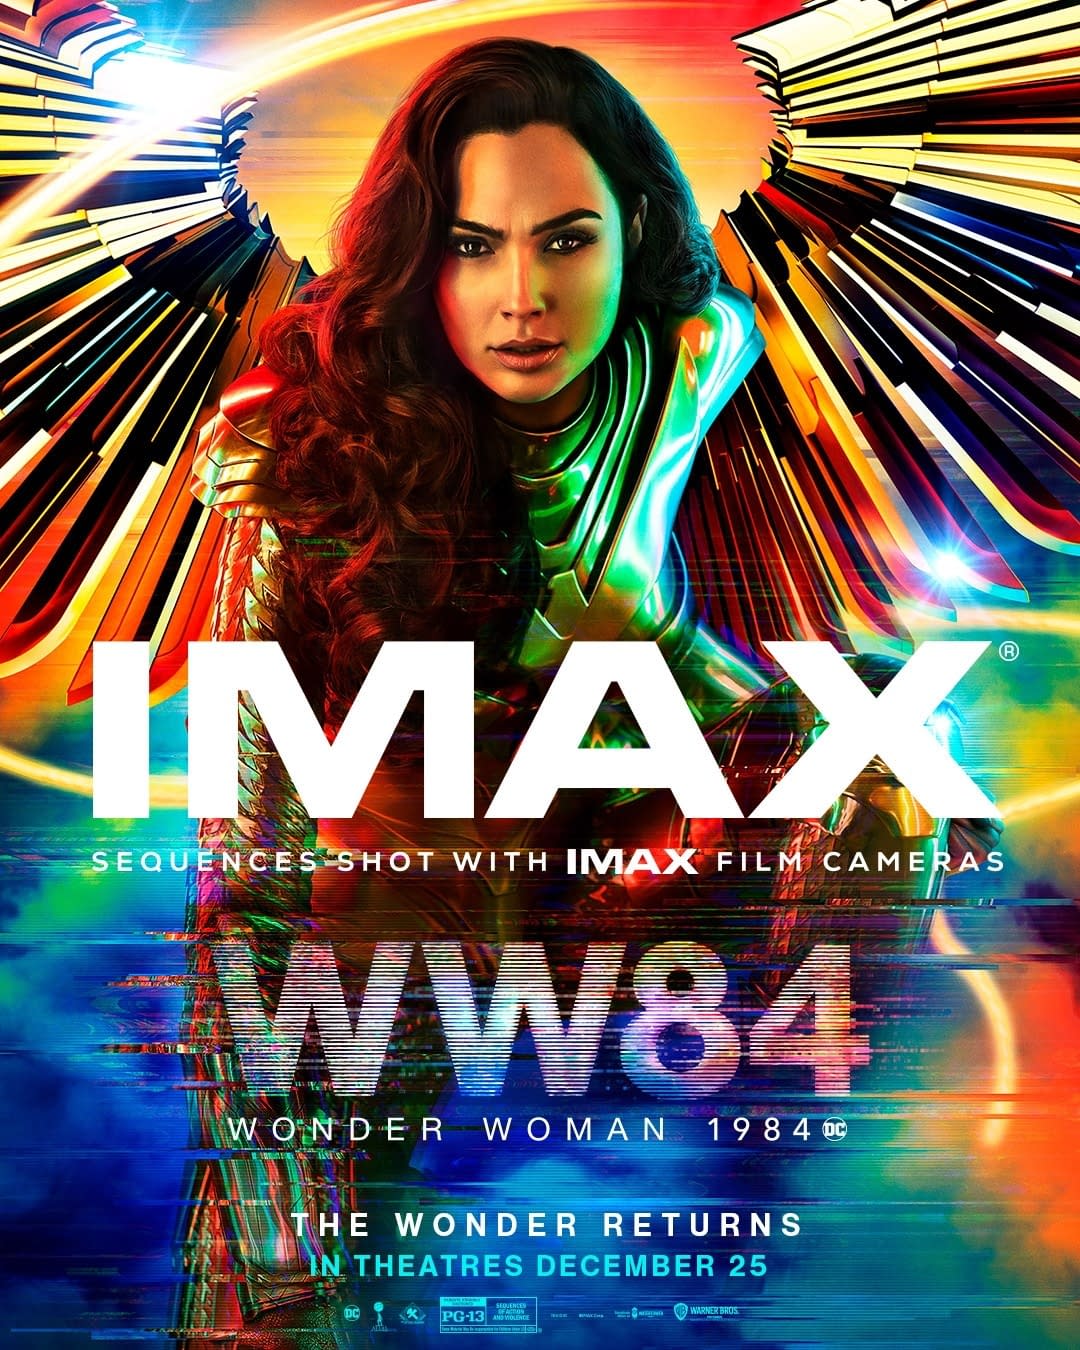 Wonder Woman 1984: HBO Max Release or Summer 2021 Delay Both Possible